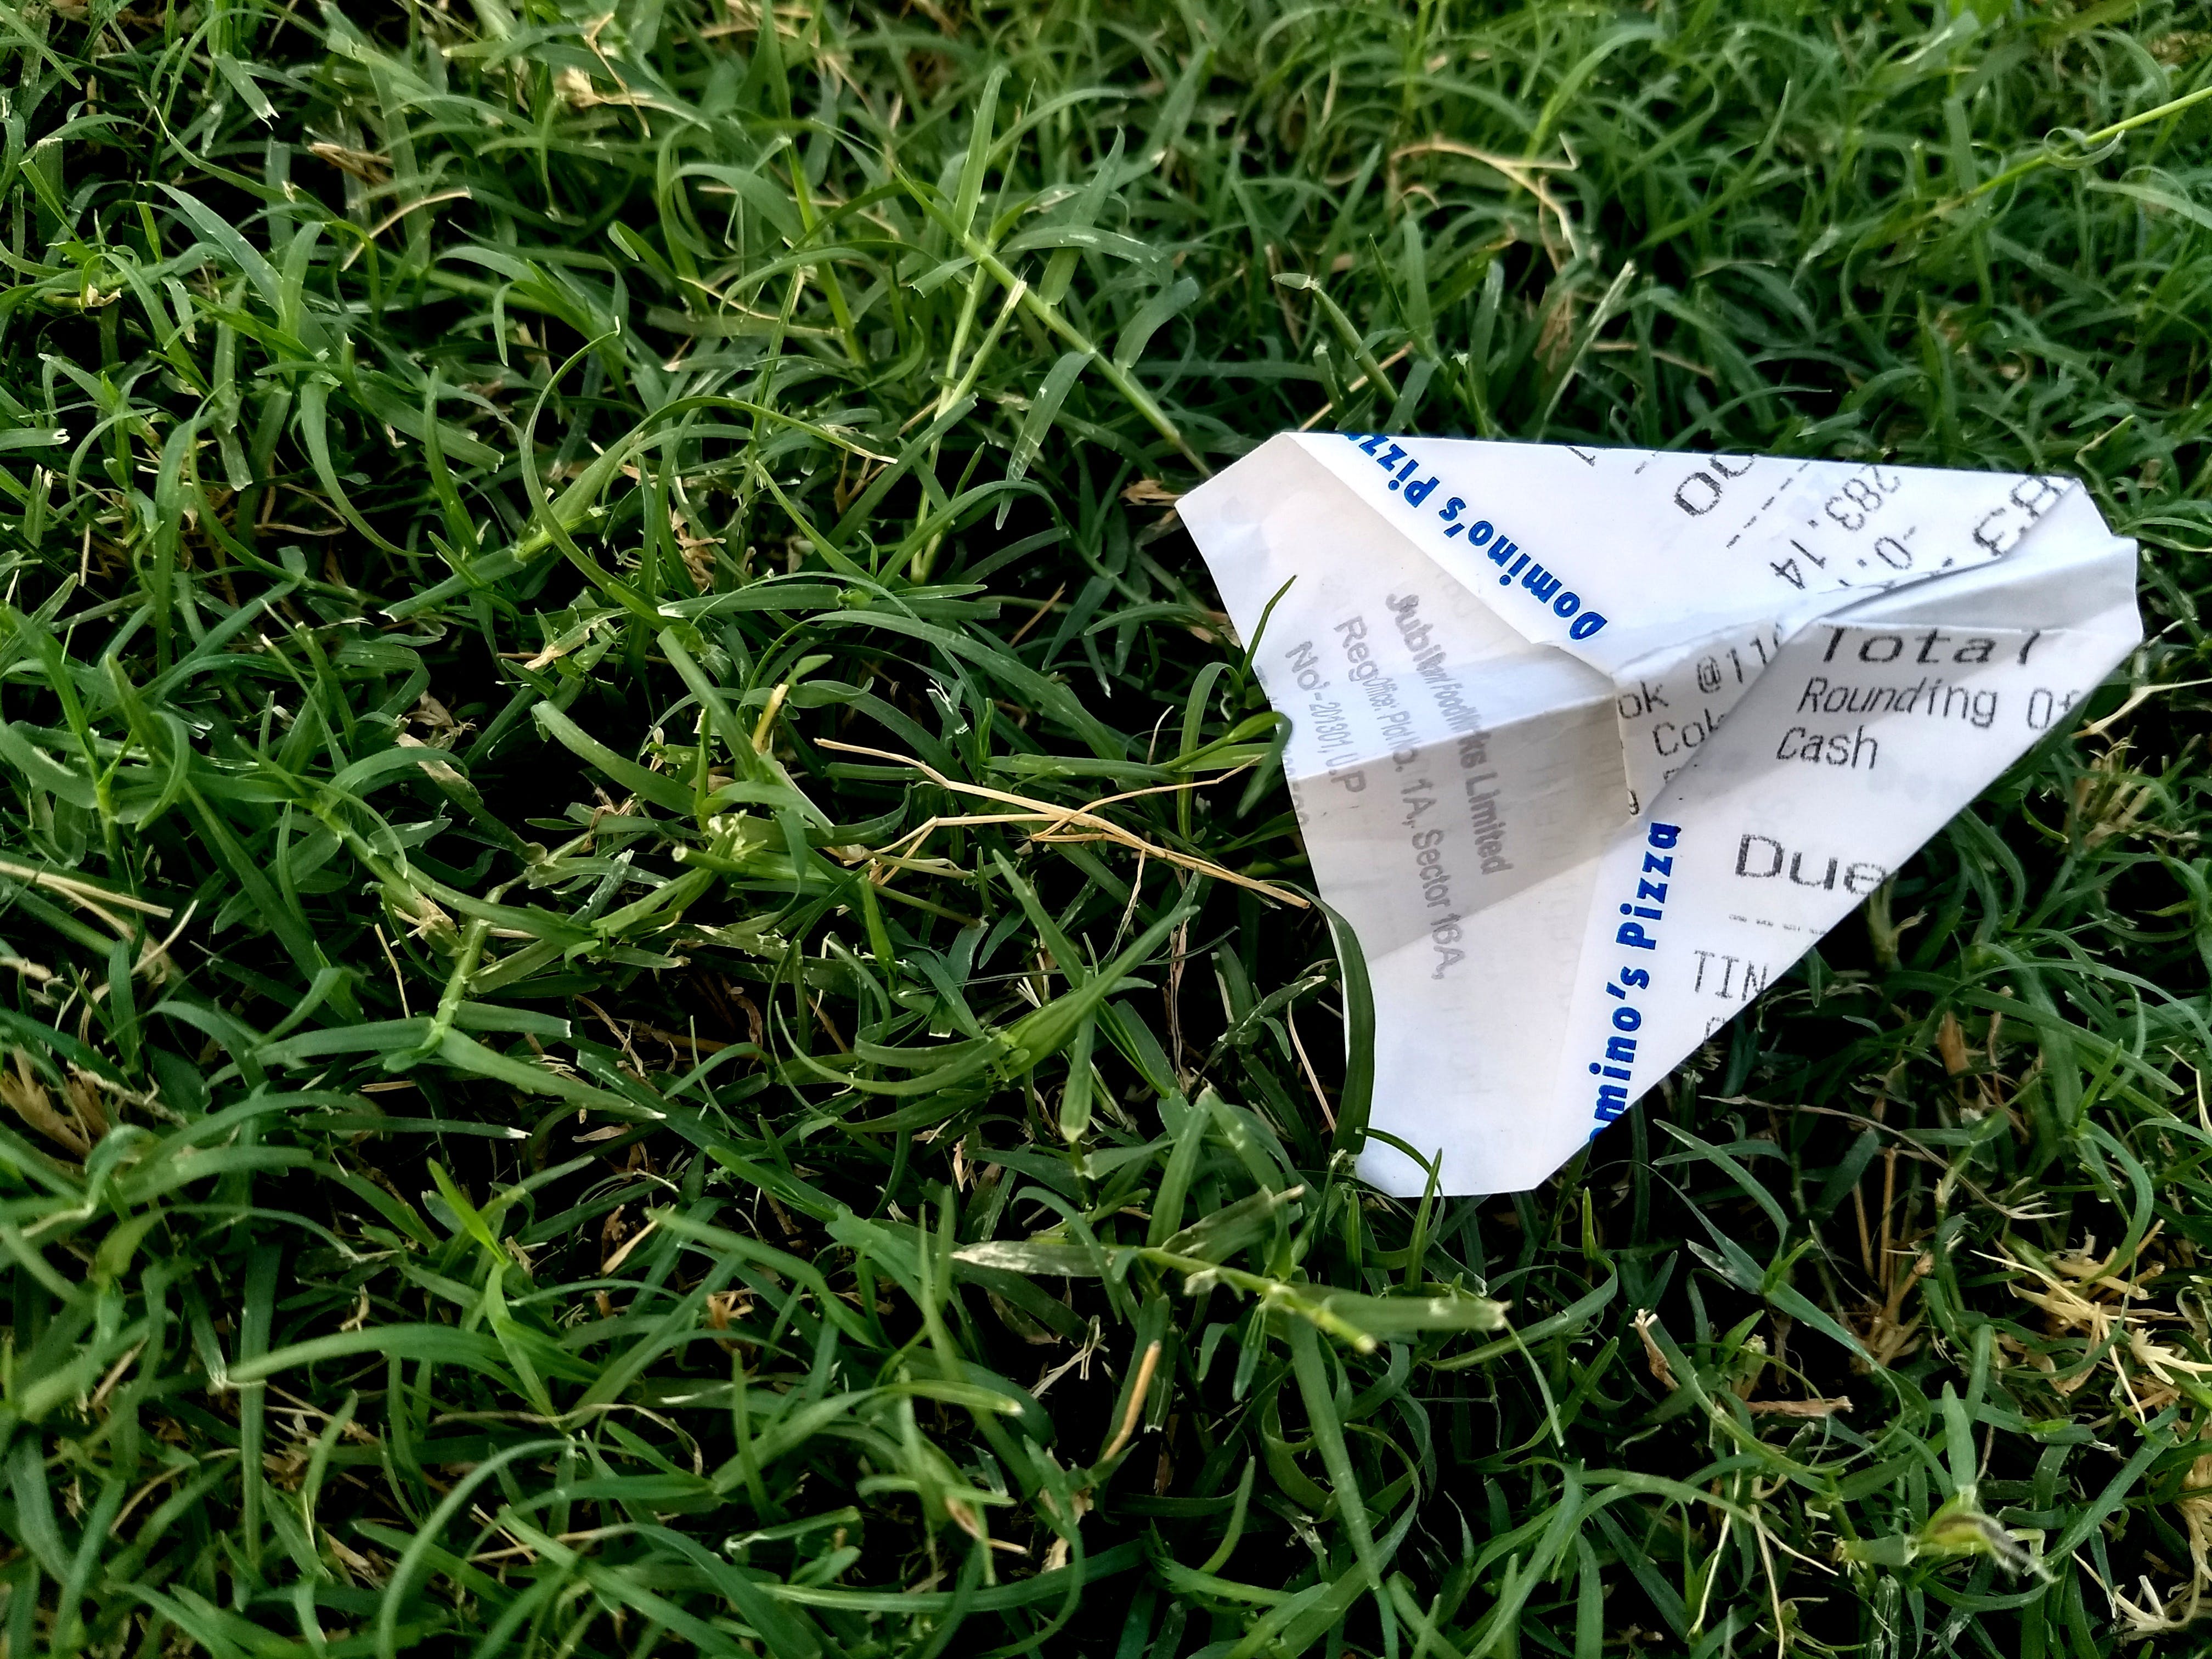 A folded up receipt made into a paper airplane, signifying paperwork panic